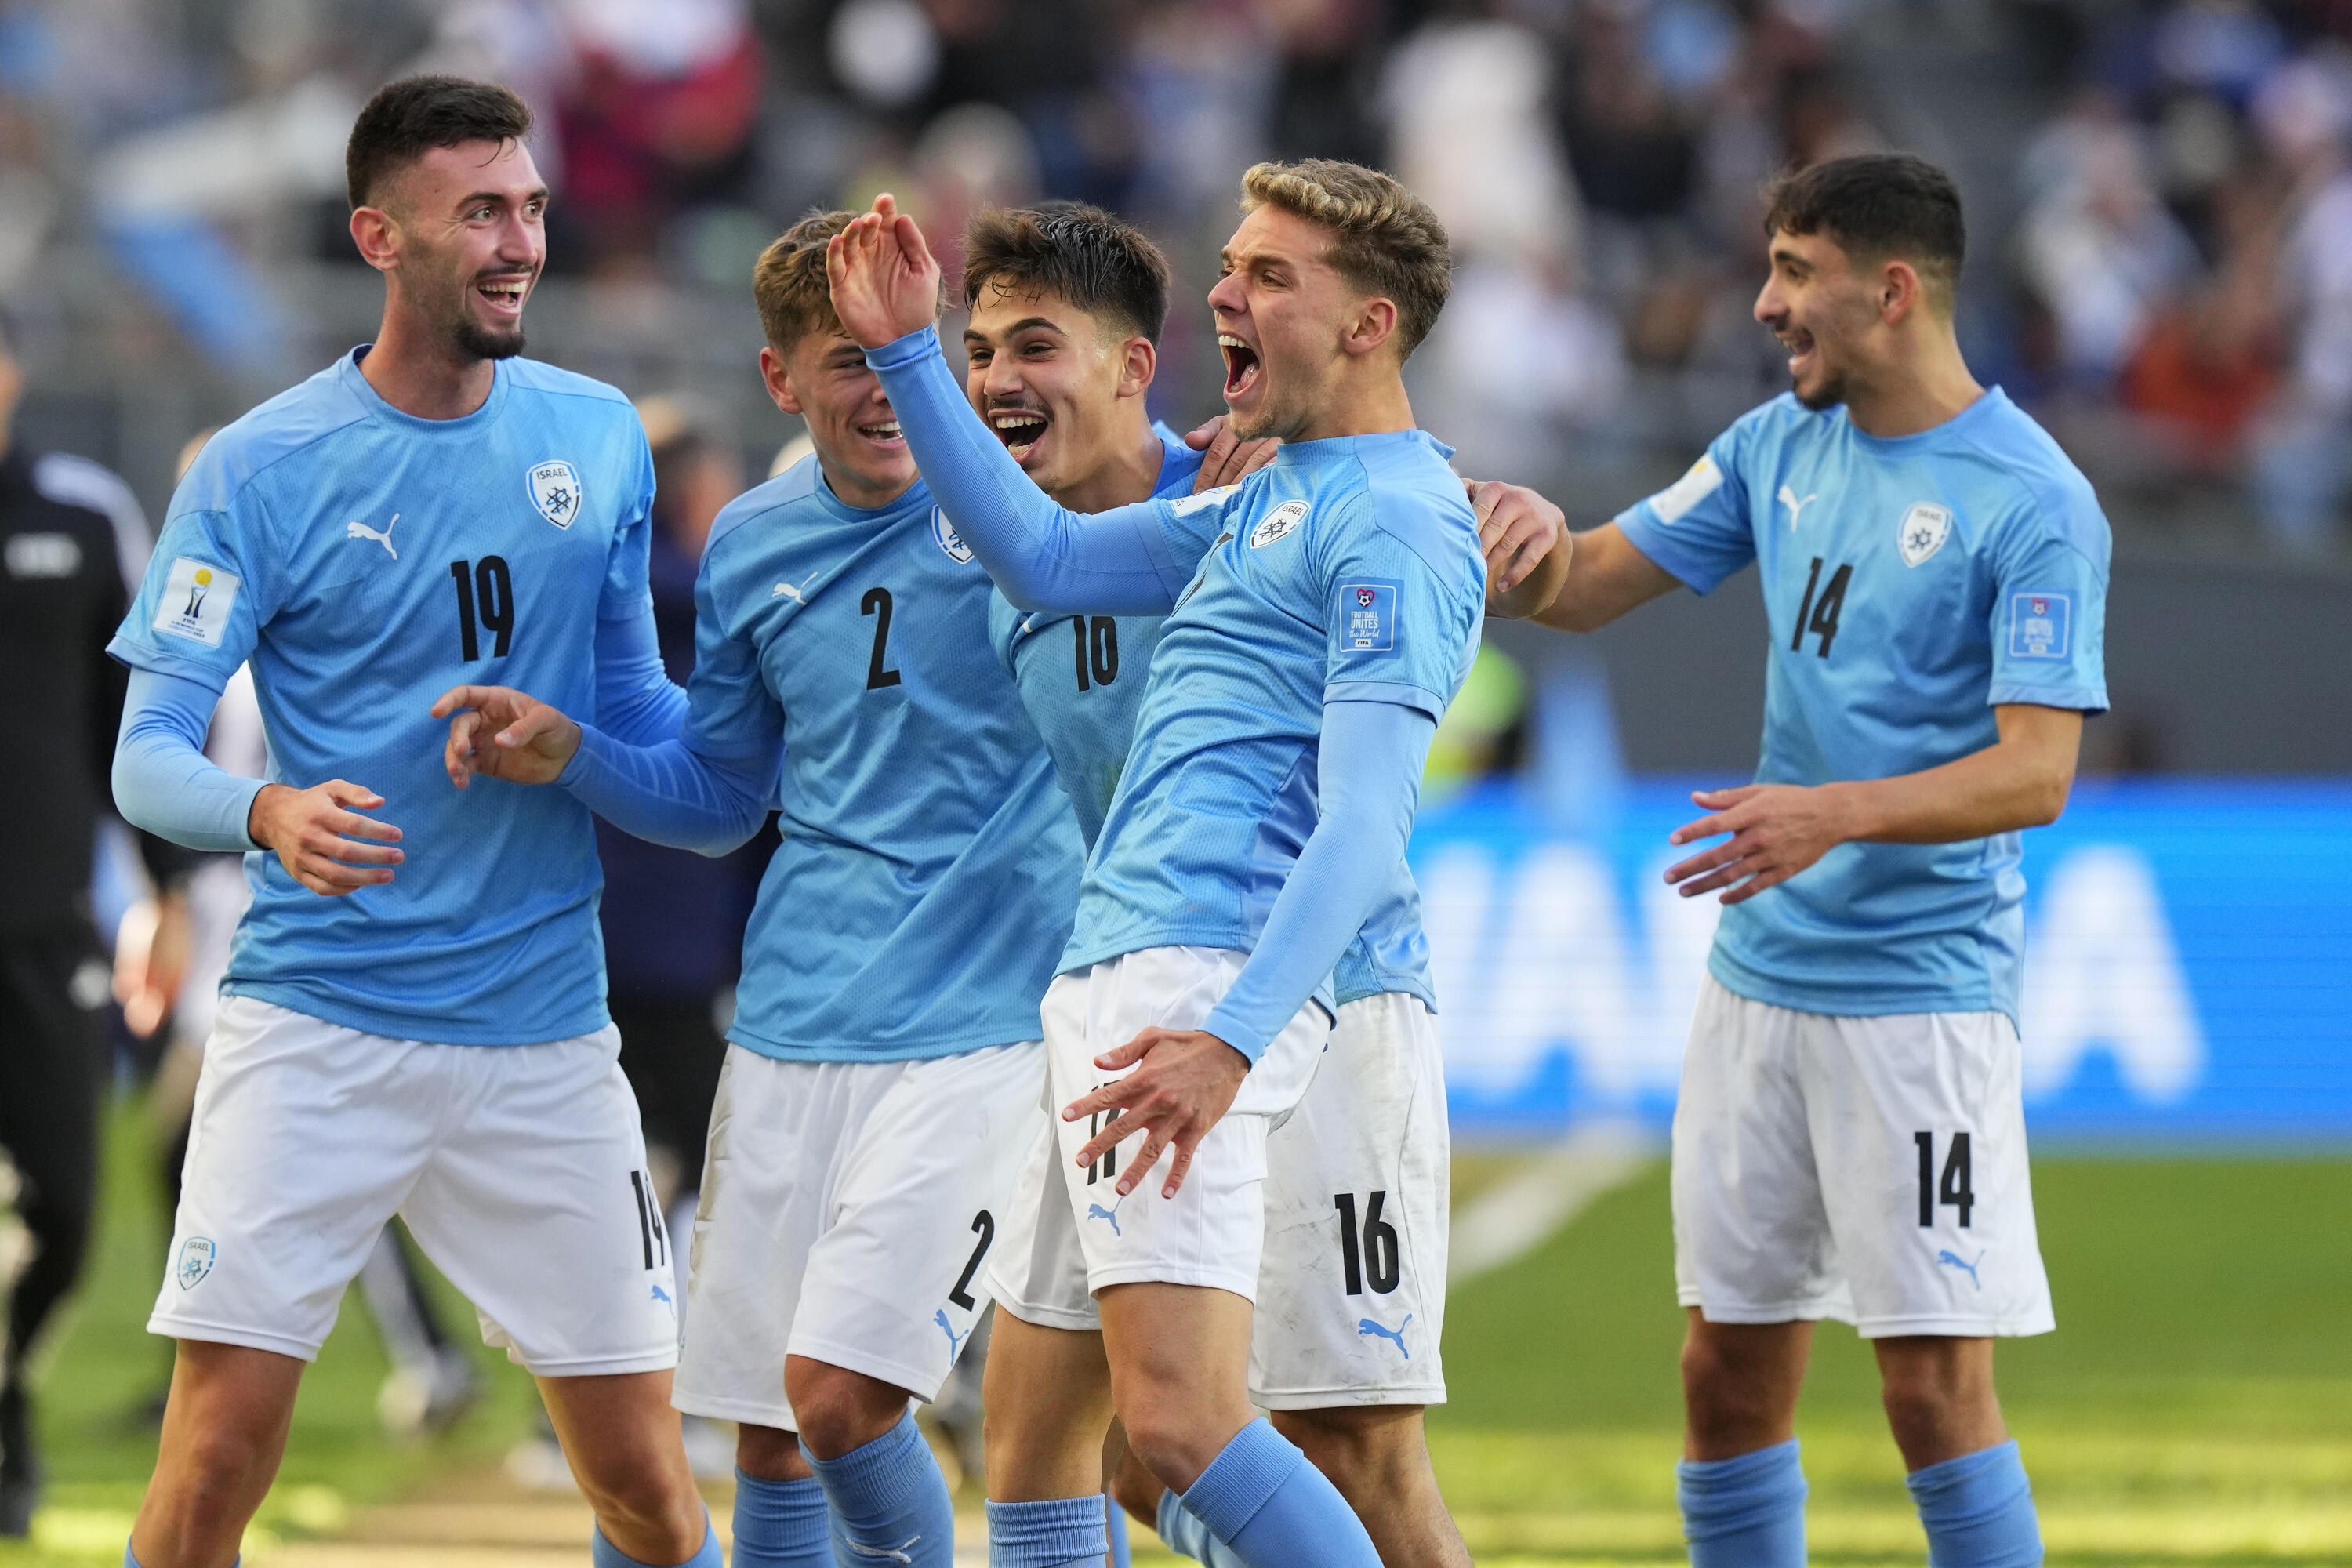 Israel clinches 3rd place in soccer's U-20 World Cup, capping thrilling run